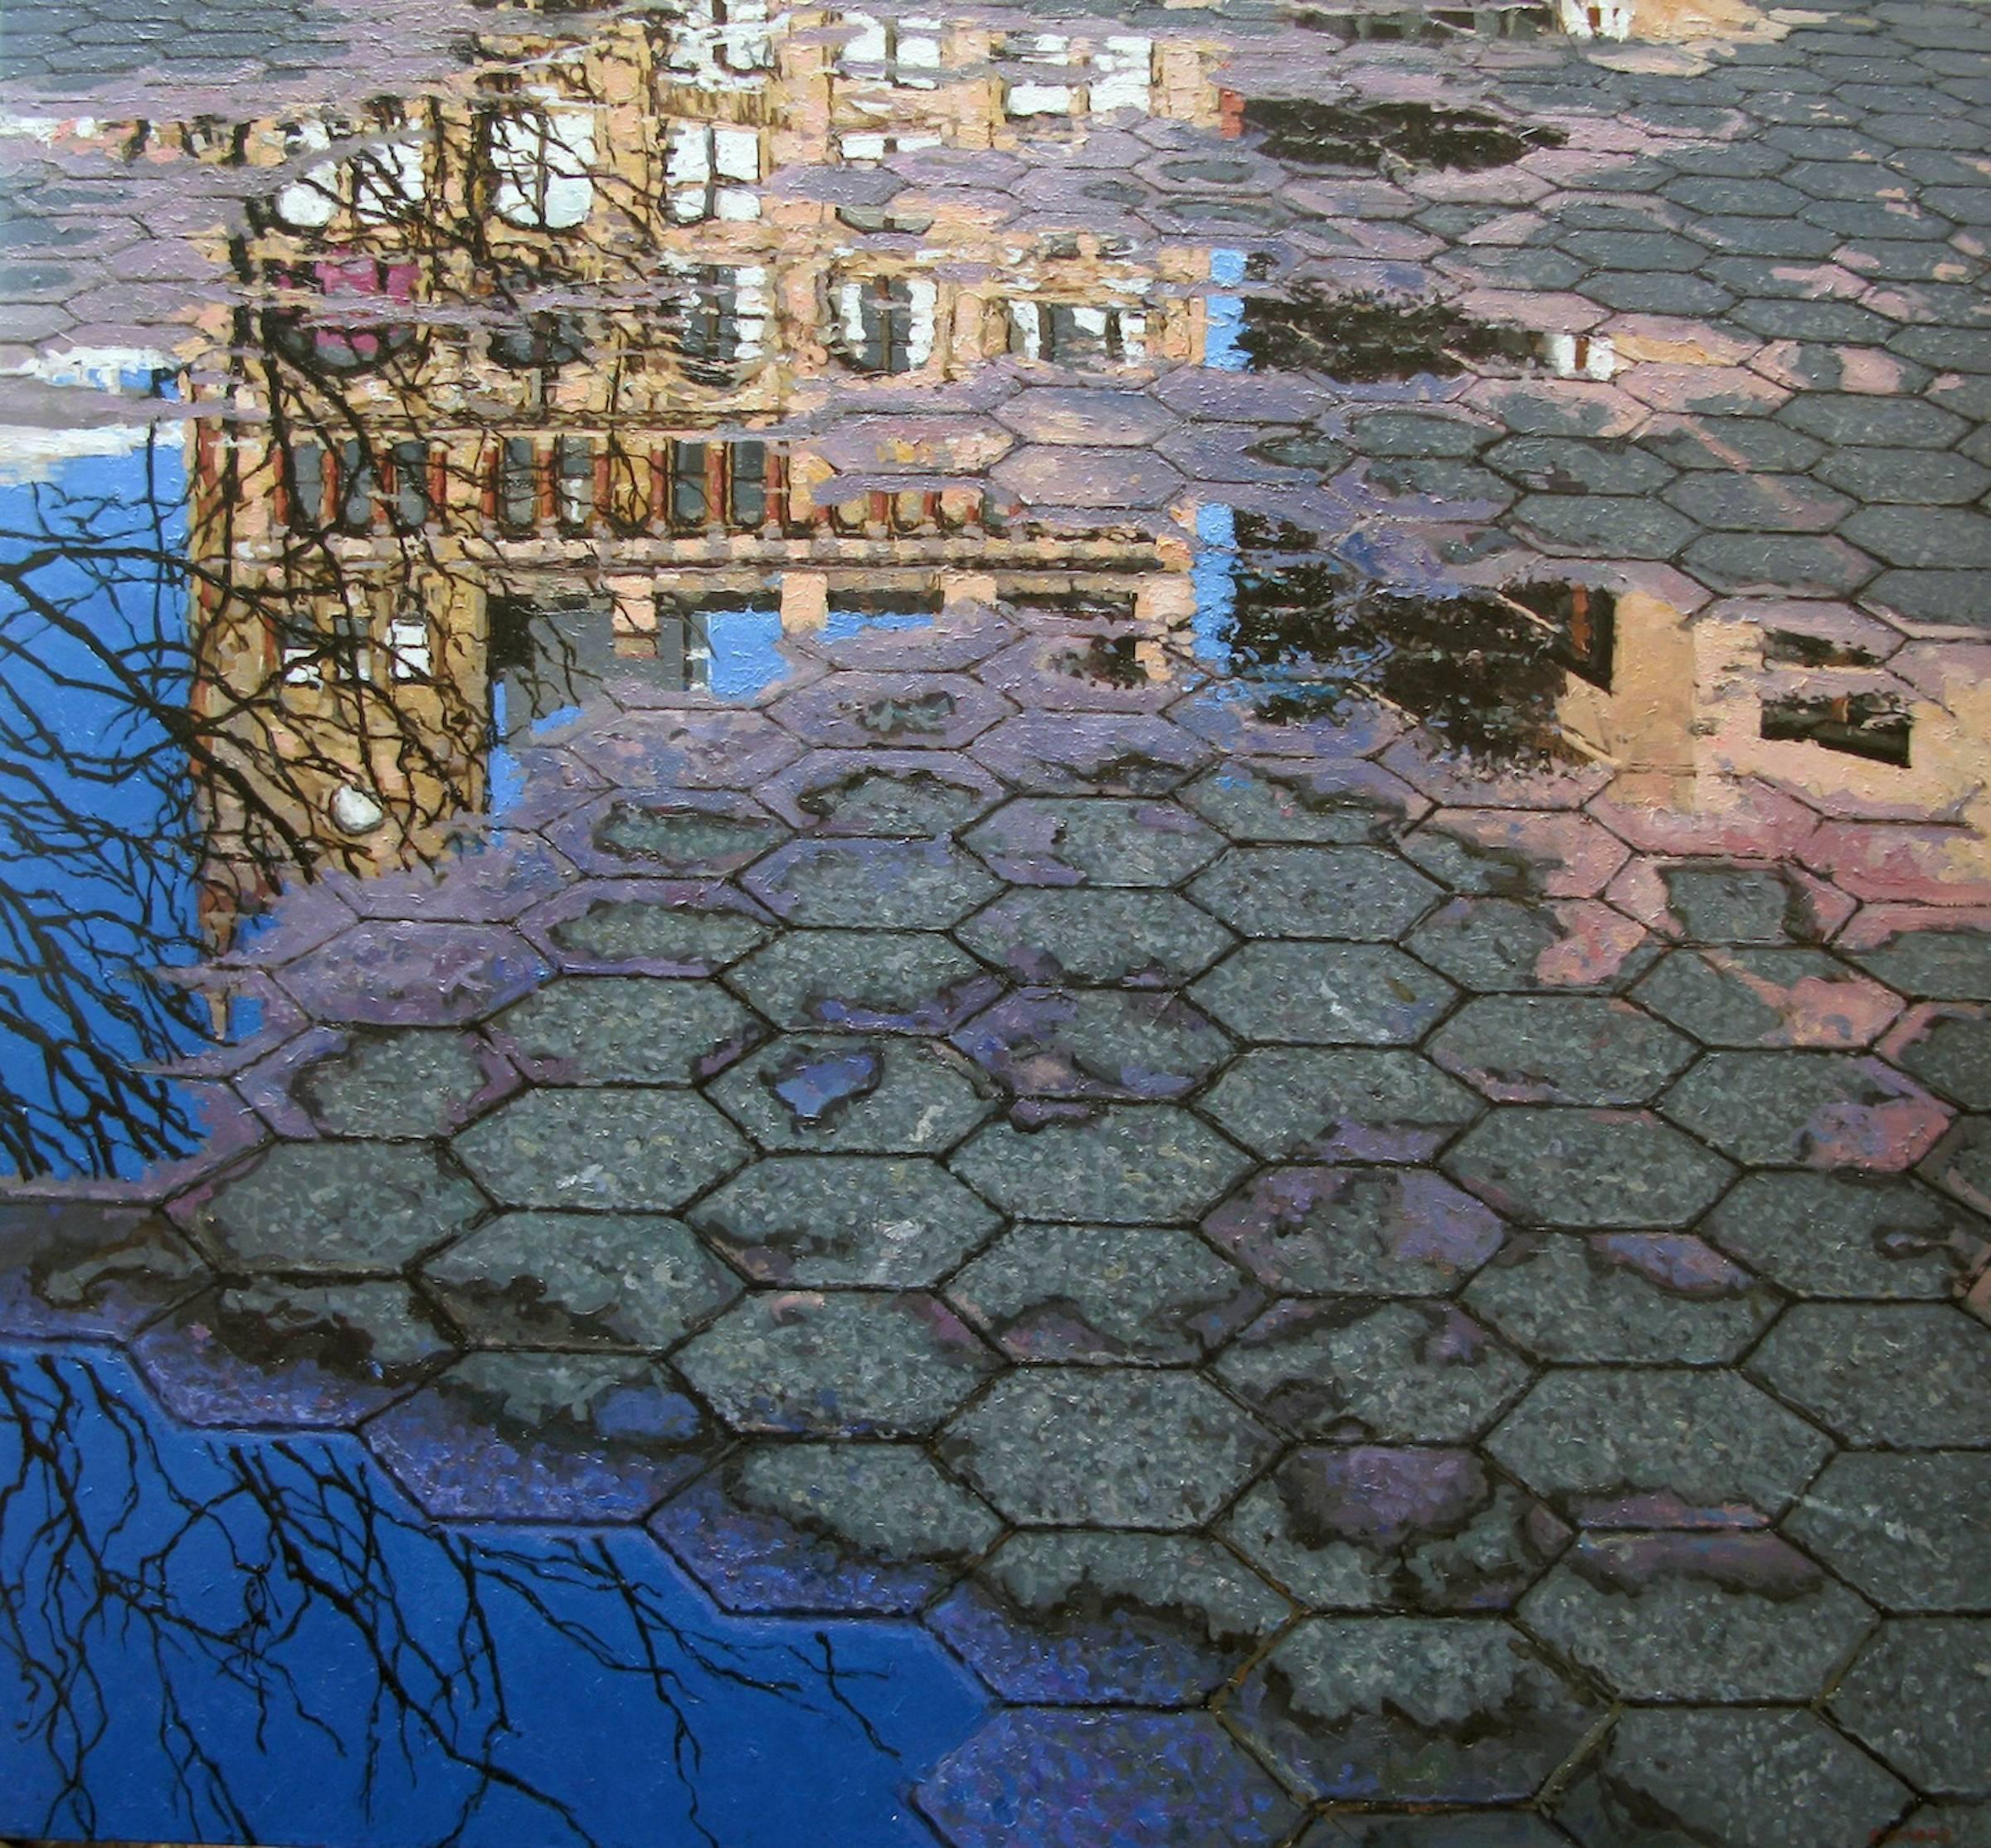 Richard Combes Landscape Painting - UNION SQUARE REFLECTION, hyper-realism, new york city, reflection in puddle